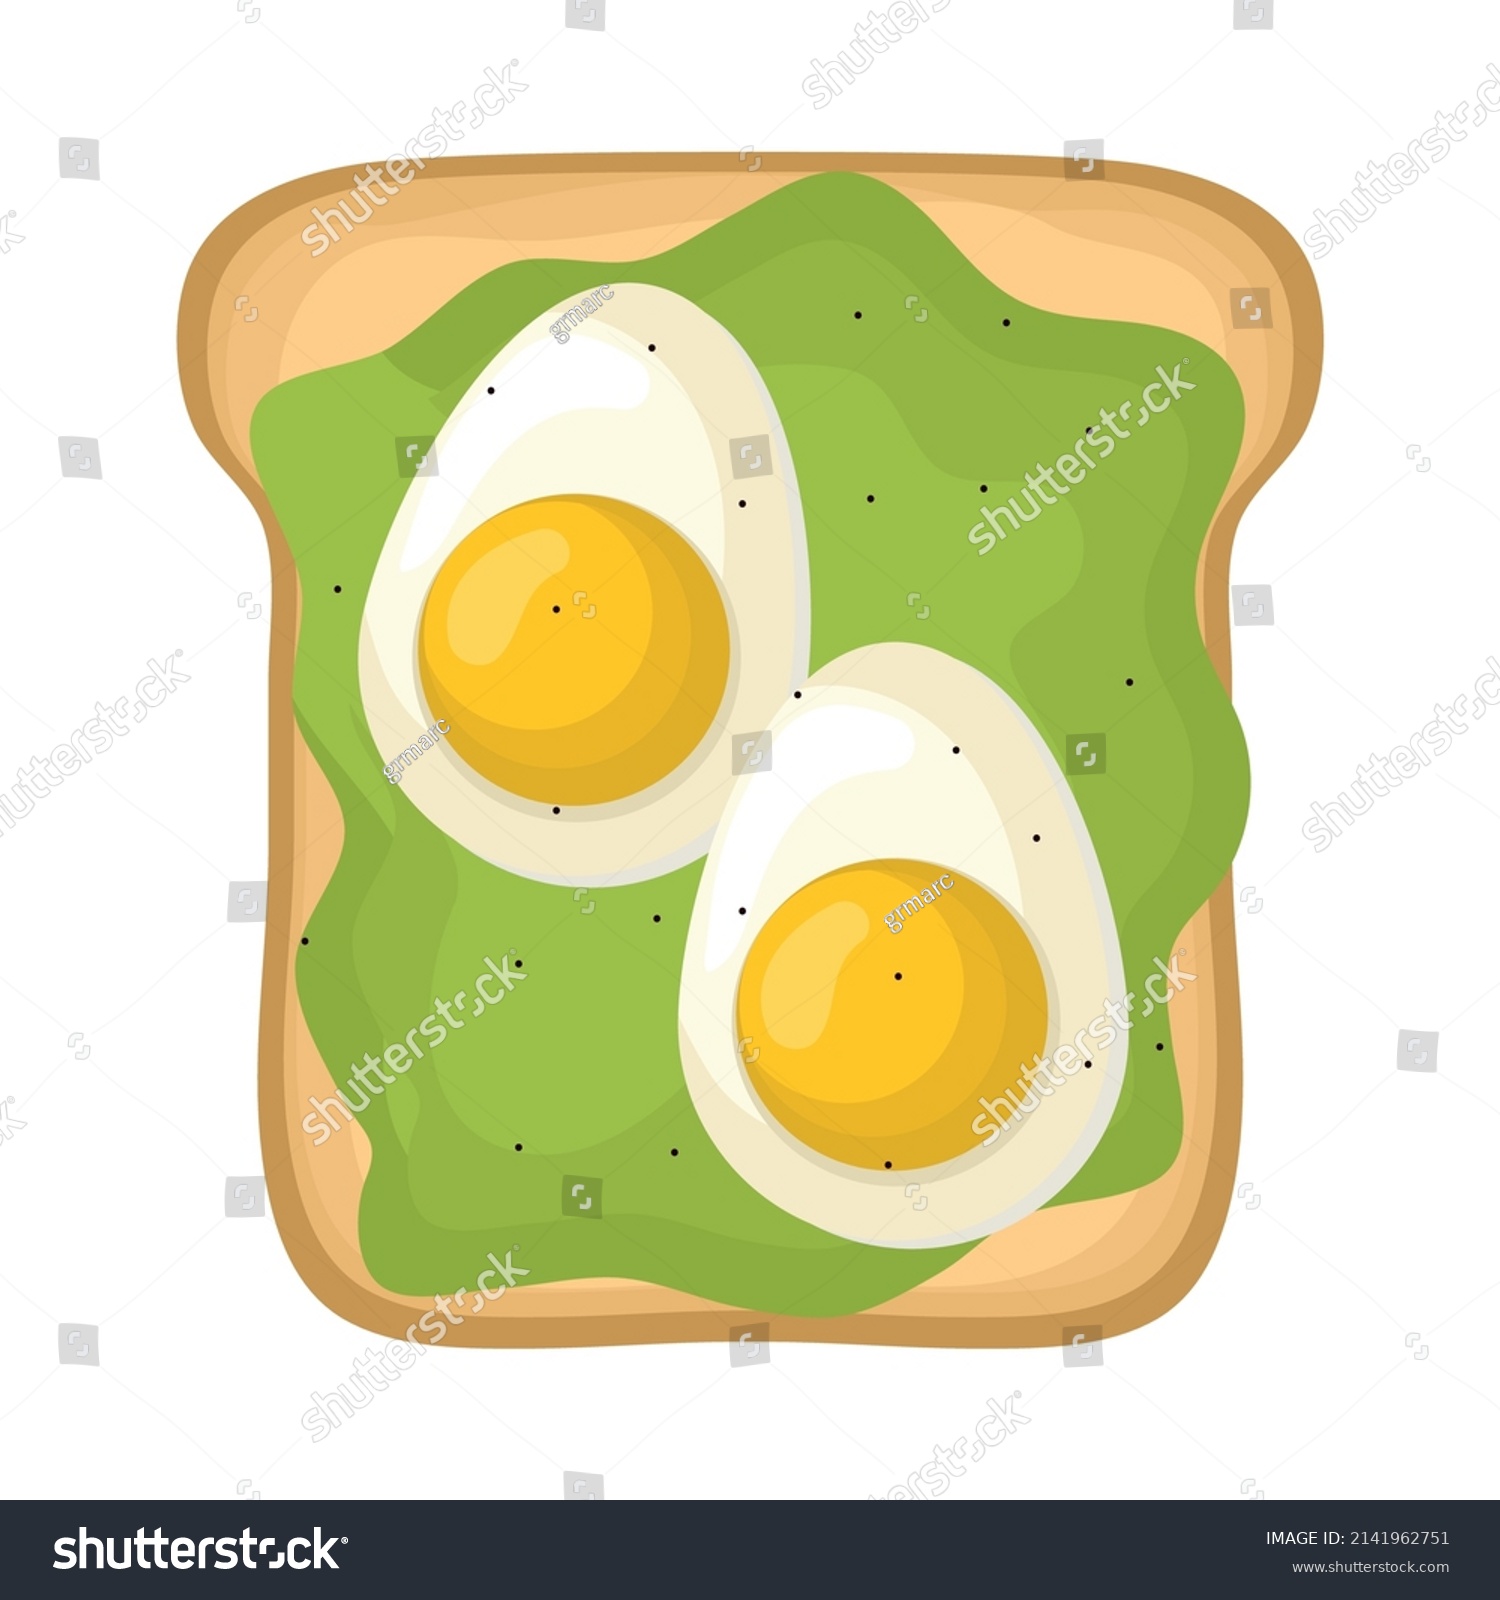 SVG of egg and avocado toast over white svg